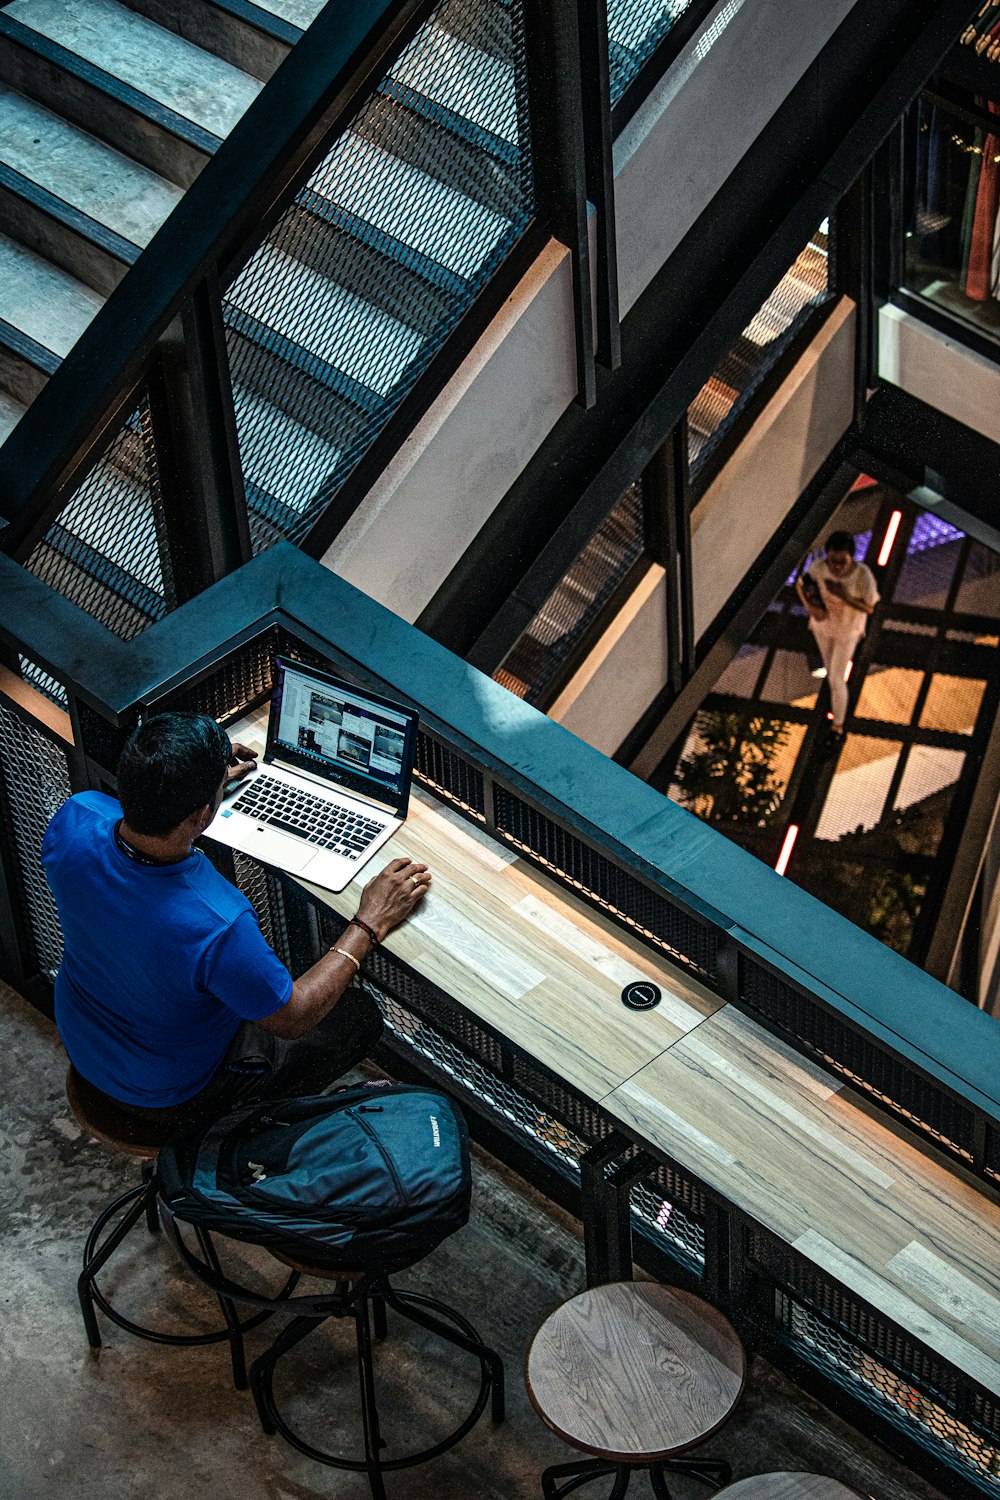 man in blue shirt sitting on chair near table using laptop computer inside building